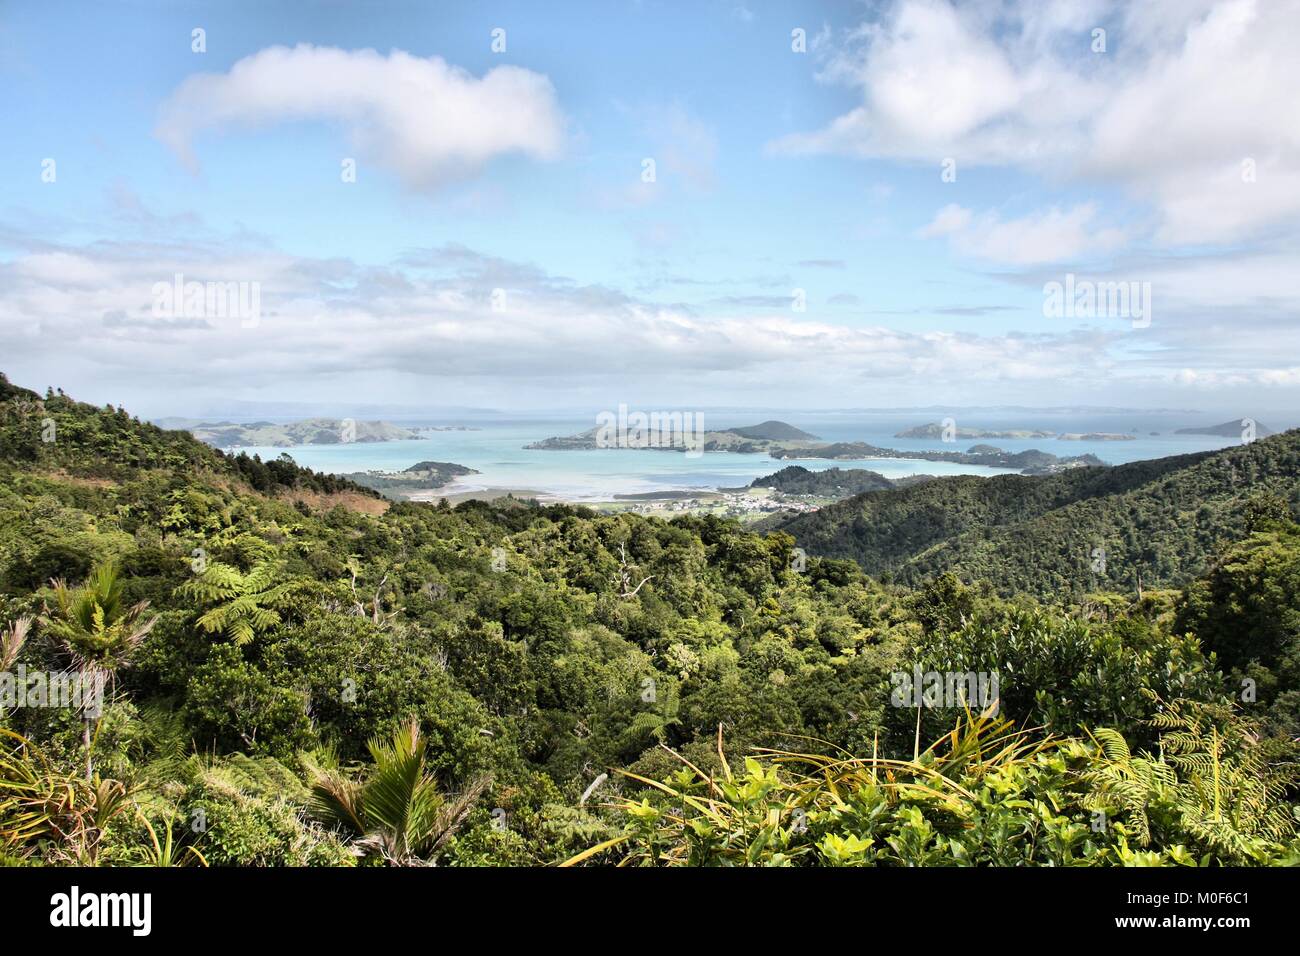 New Zealand natural landscape - aerial view from a temperate rainforest hill towards islands of Coromandel Peninsula. Stock Photo